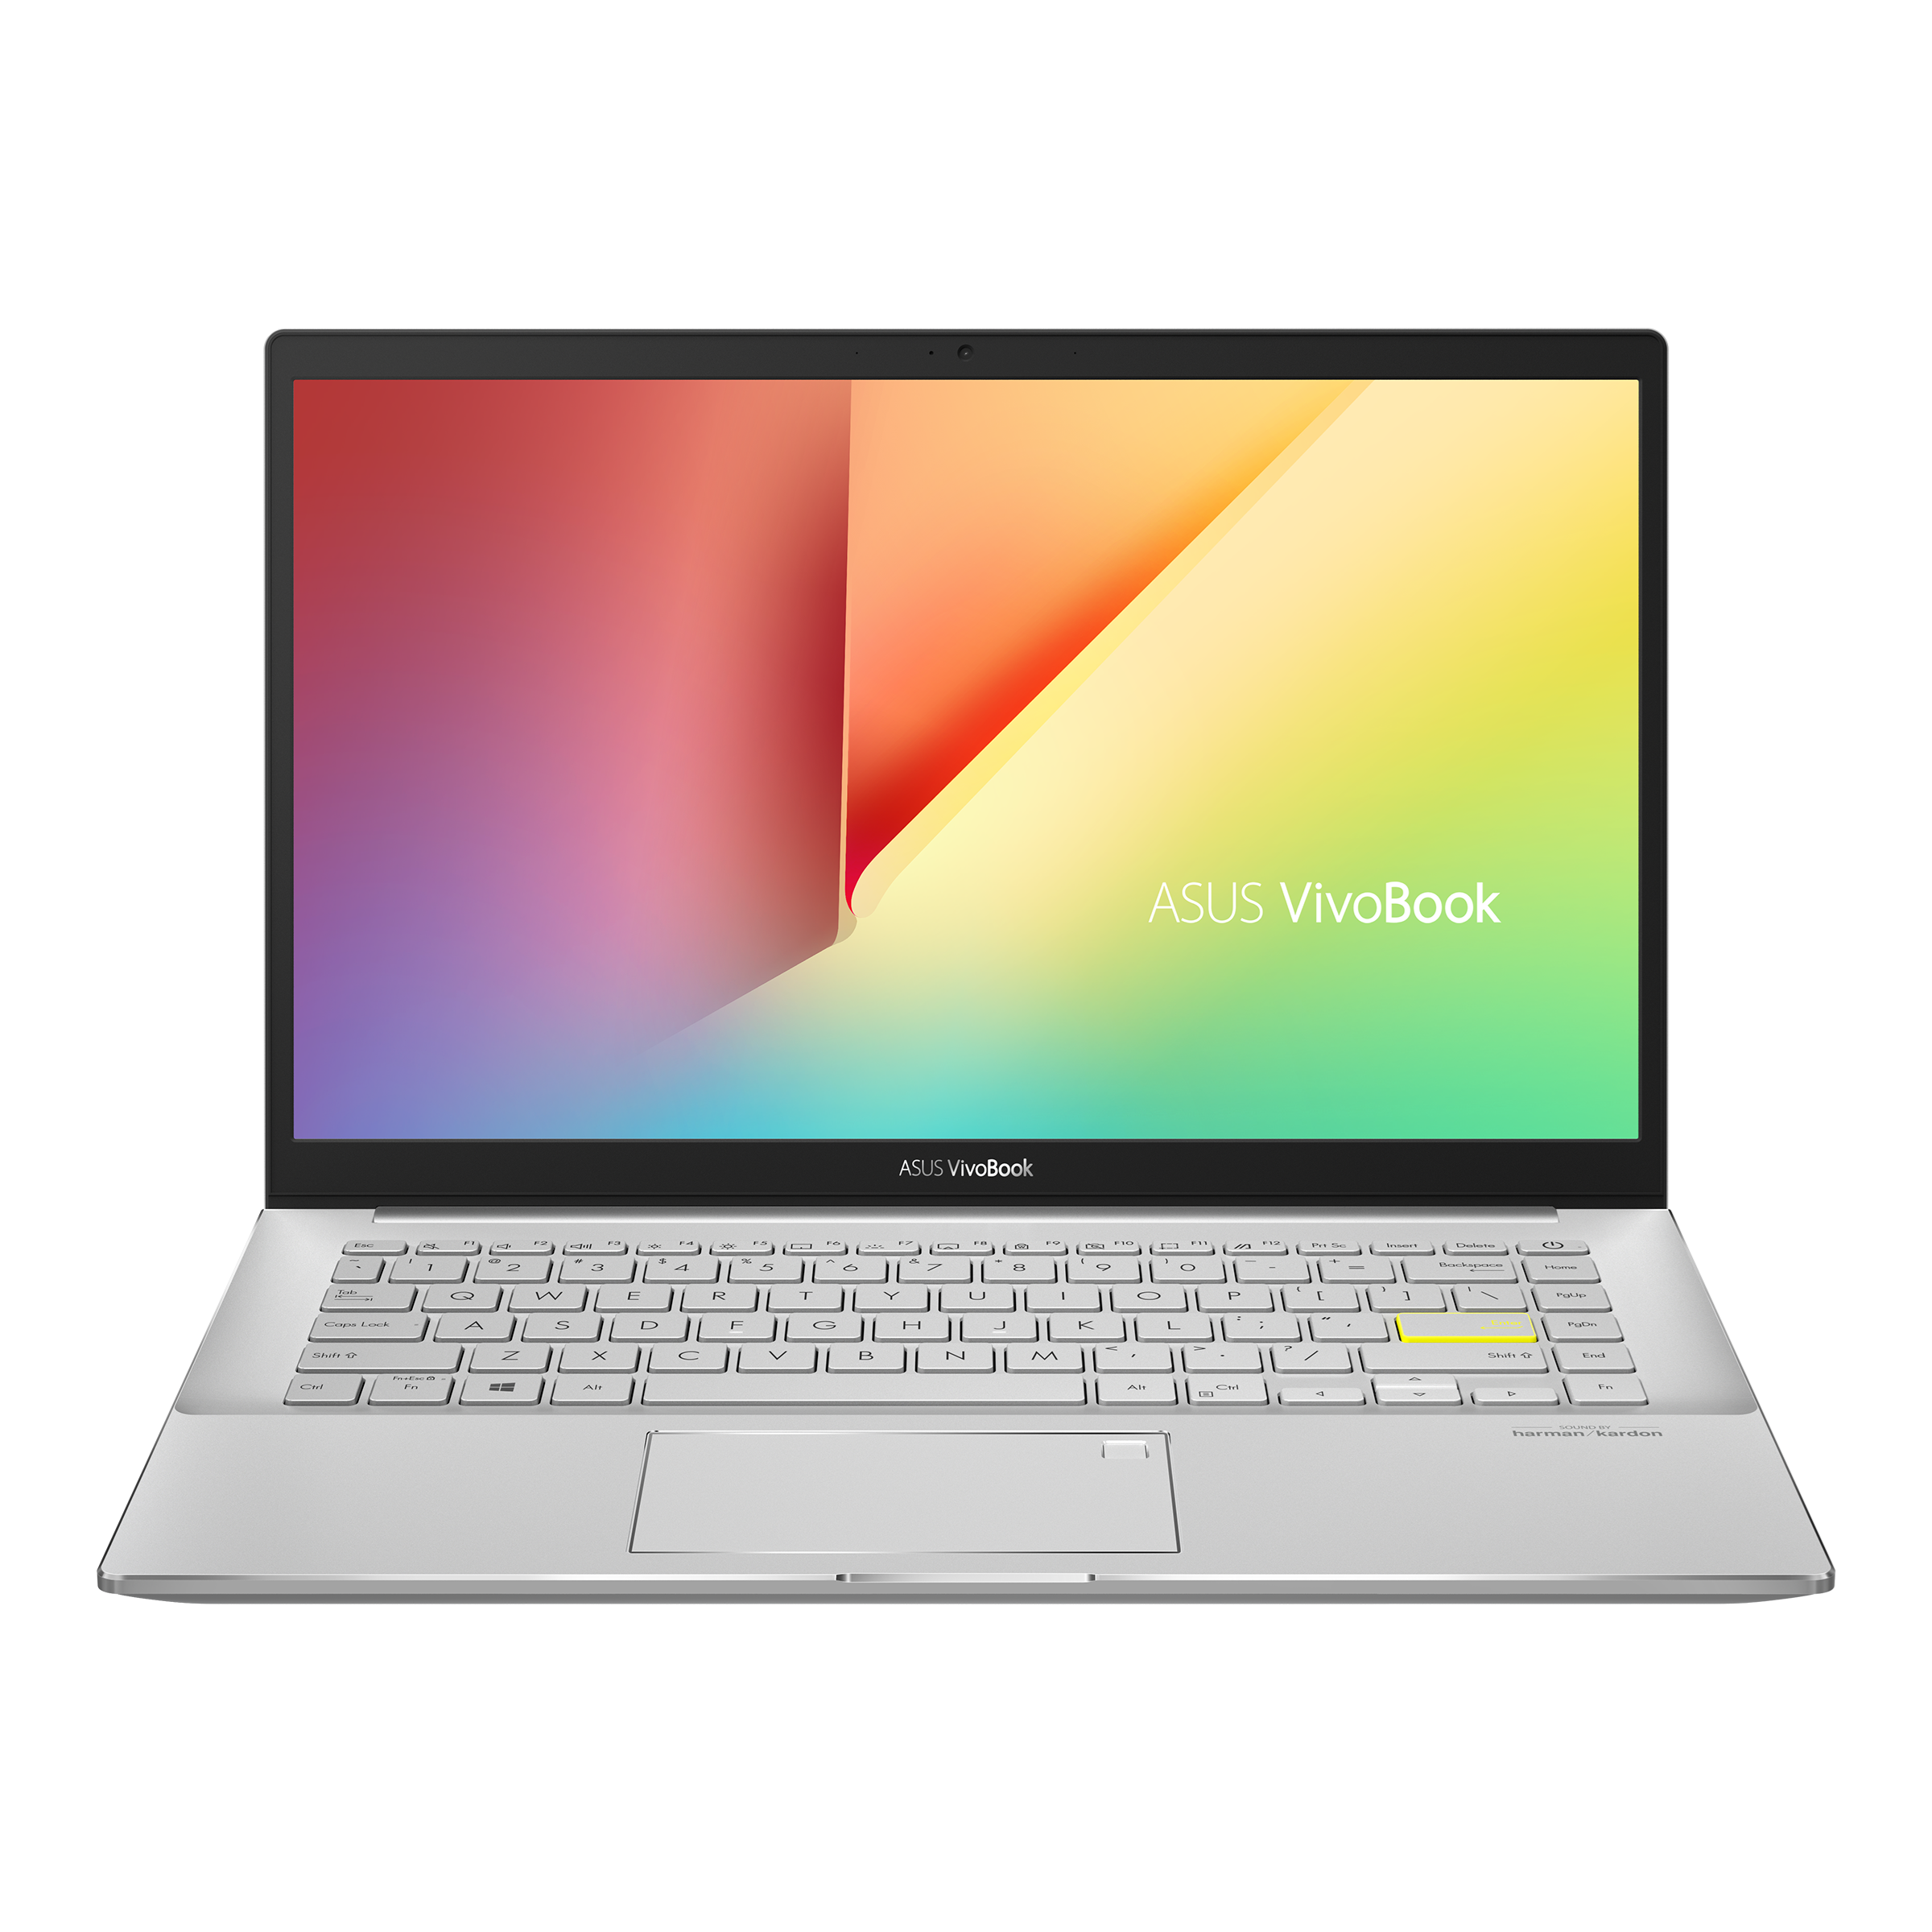 Vivobook｜Laptops For Home｜ASUS India